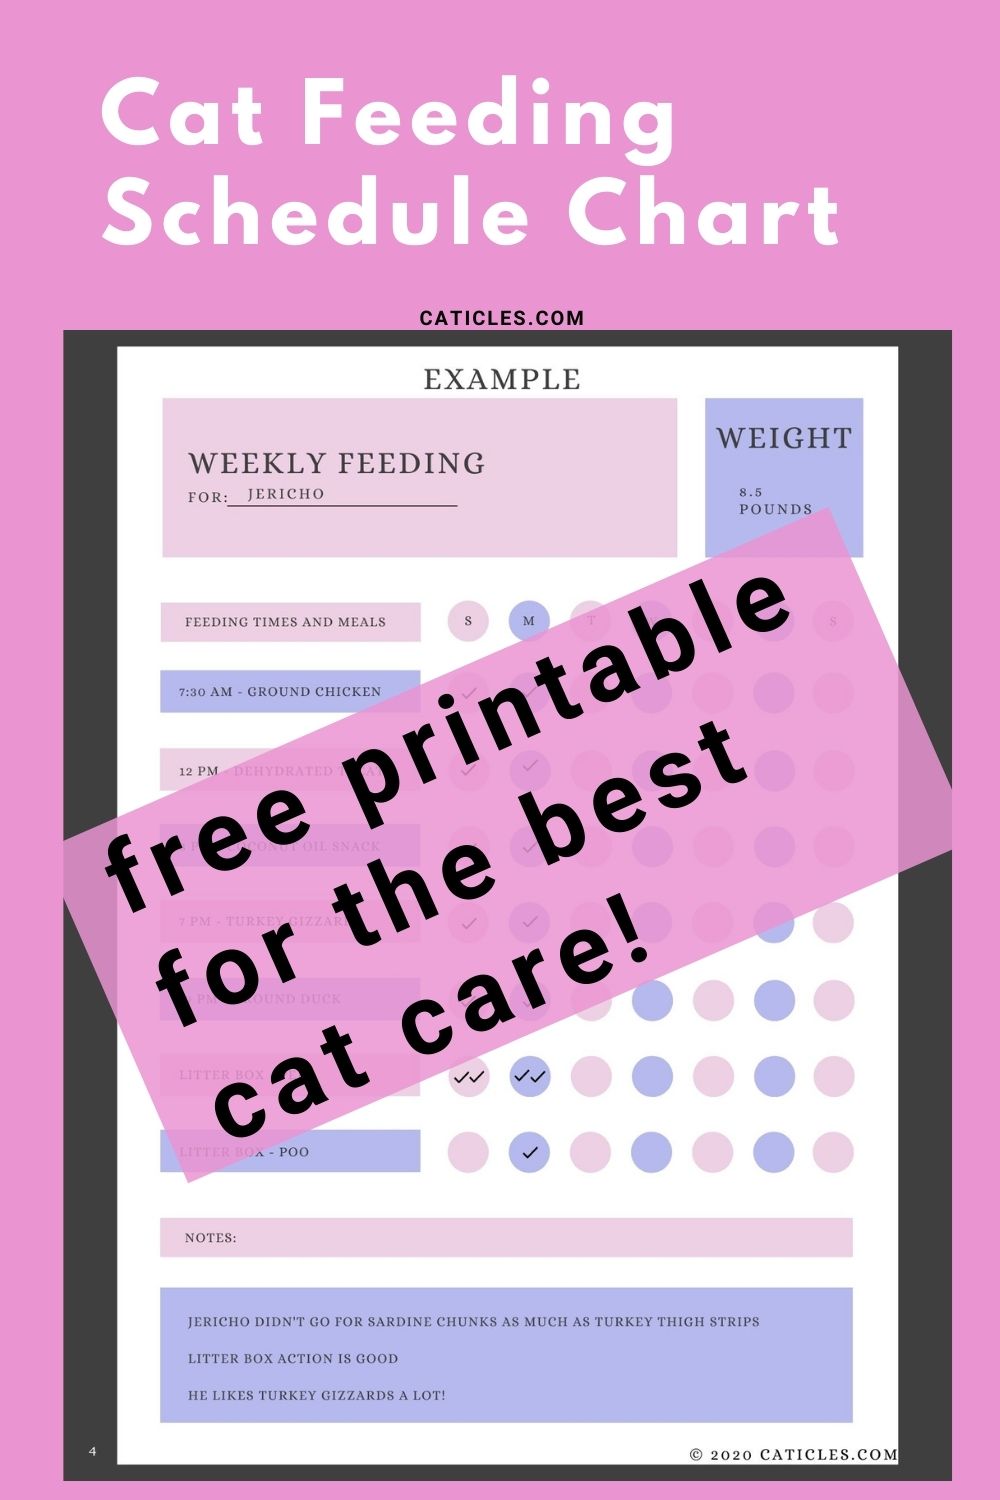 Cat Feeding Schedule Chart [How Many Times to Feed Guide] CATICLES